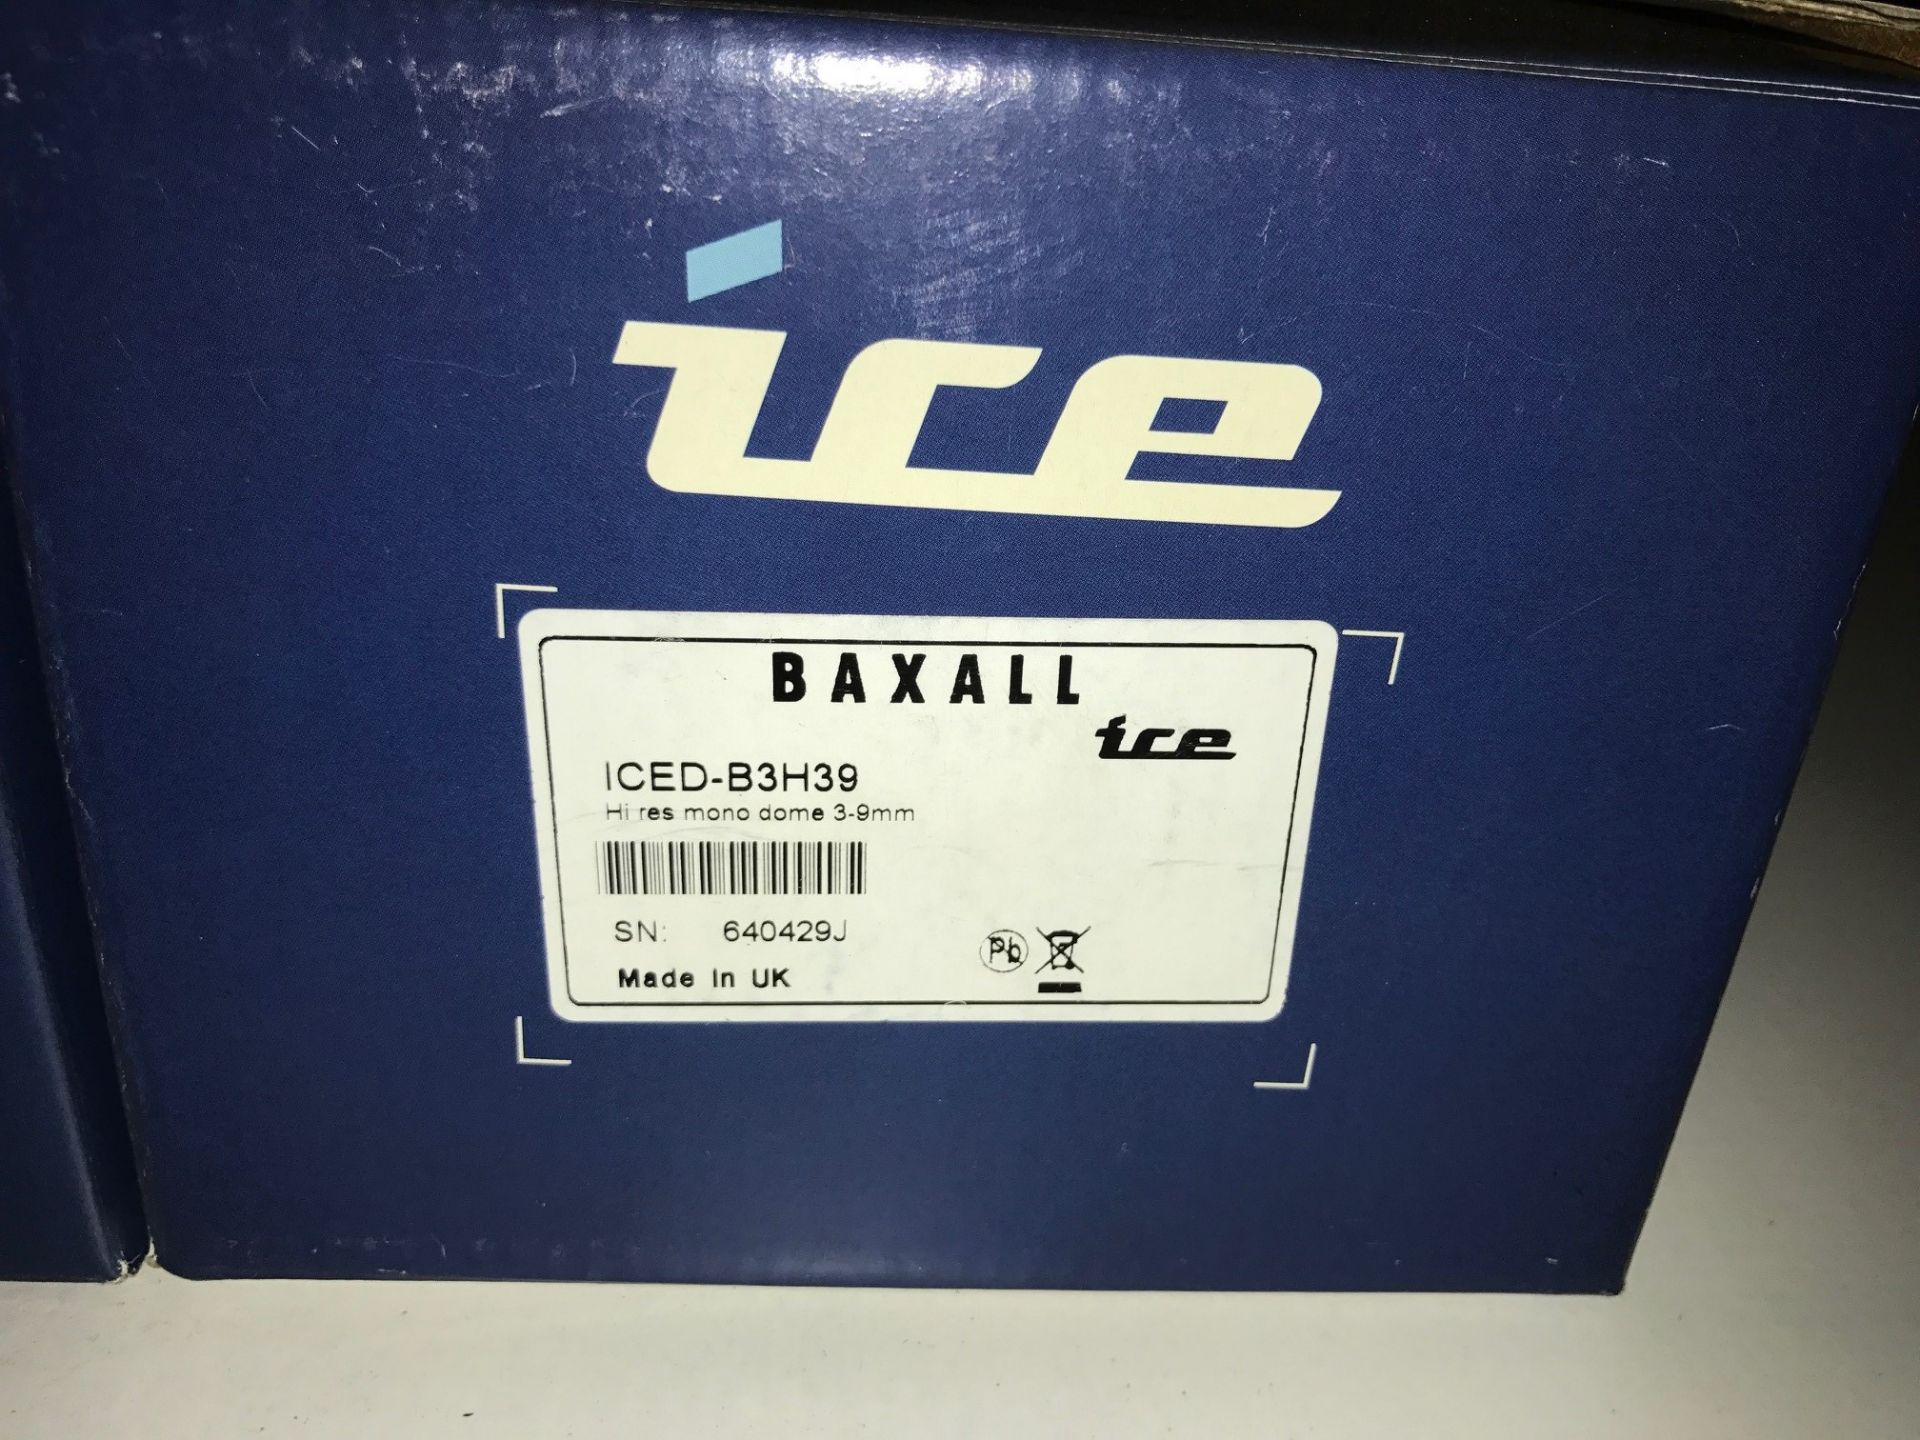 2 x Baxall ICED-B3H39 Hi Res Dome Cameras 3-9mm (Brand New & Boxed) - Image 3 of 3